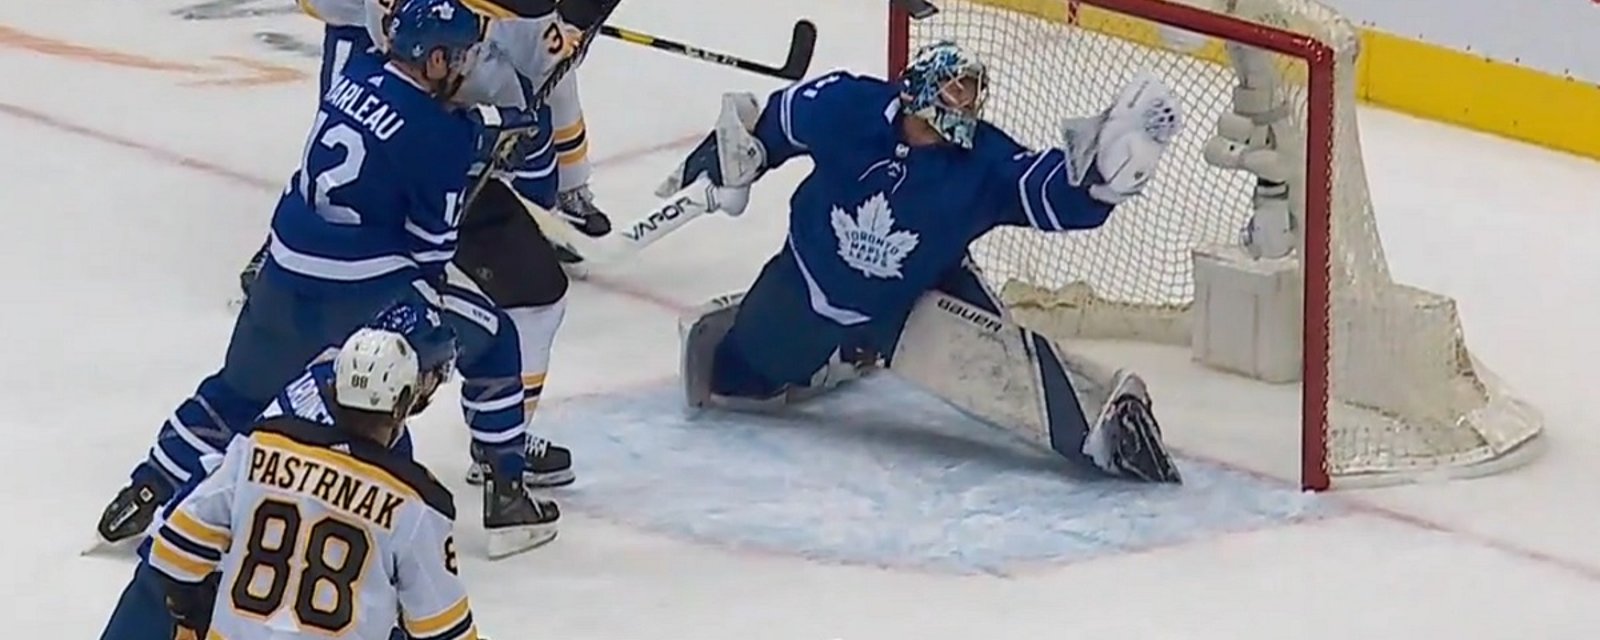 Frederik Anderson shocks Bergeron with one of his best saves of the year!